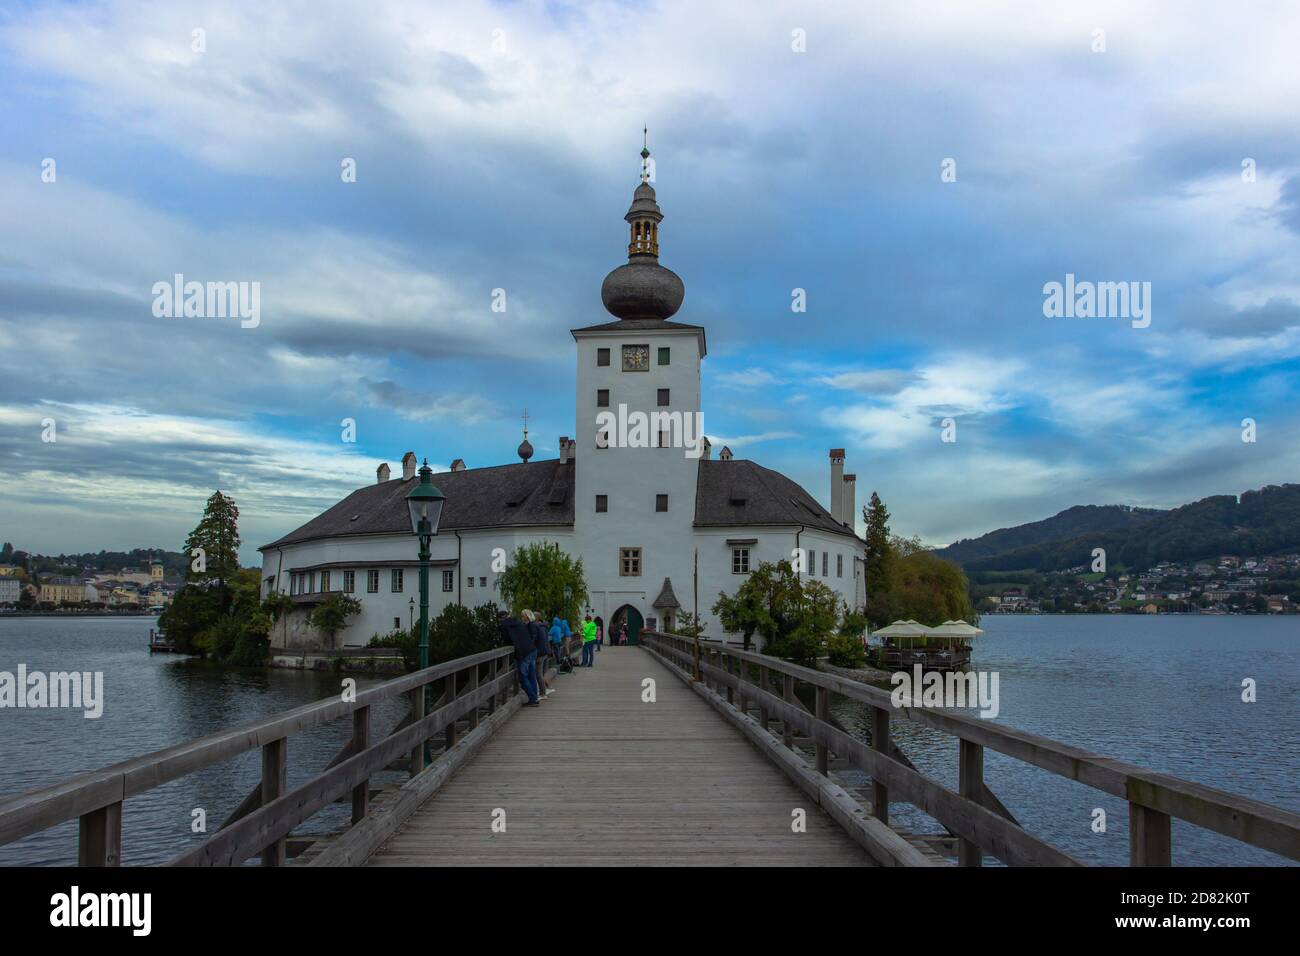 Gmunden, Austria - October 2, 2020. Summer resort town in Upper Austria situated next to the lake Traunsee and surrounded by high mountains. Main Stock Photo